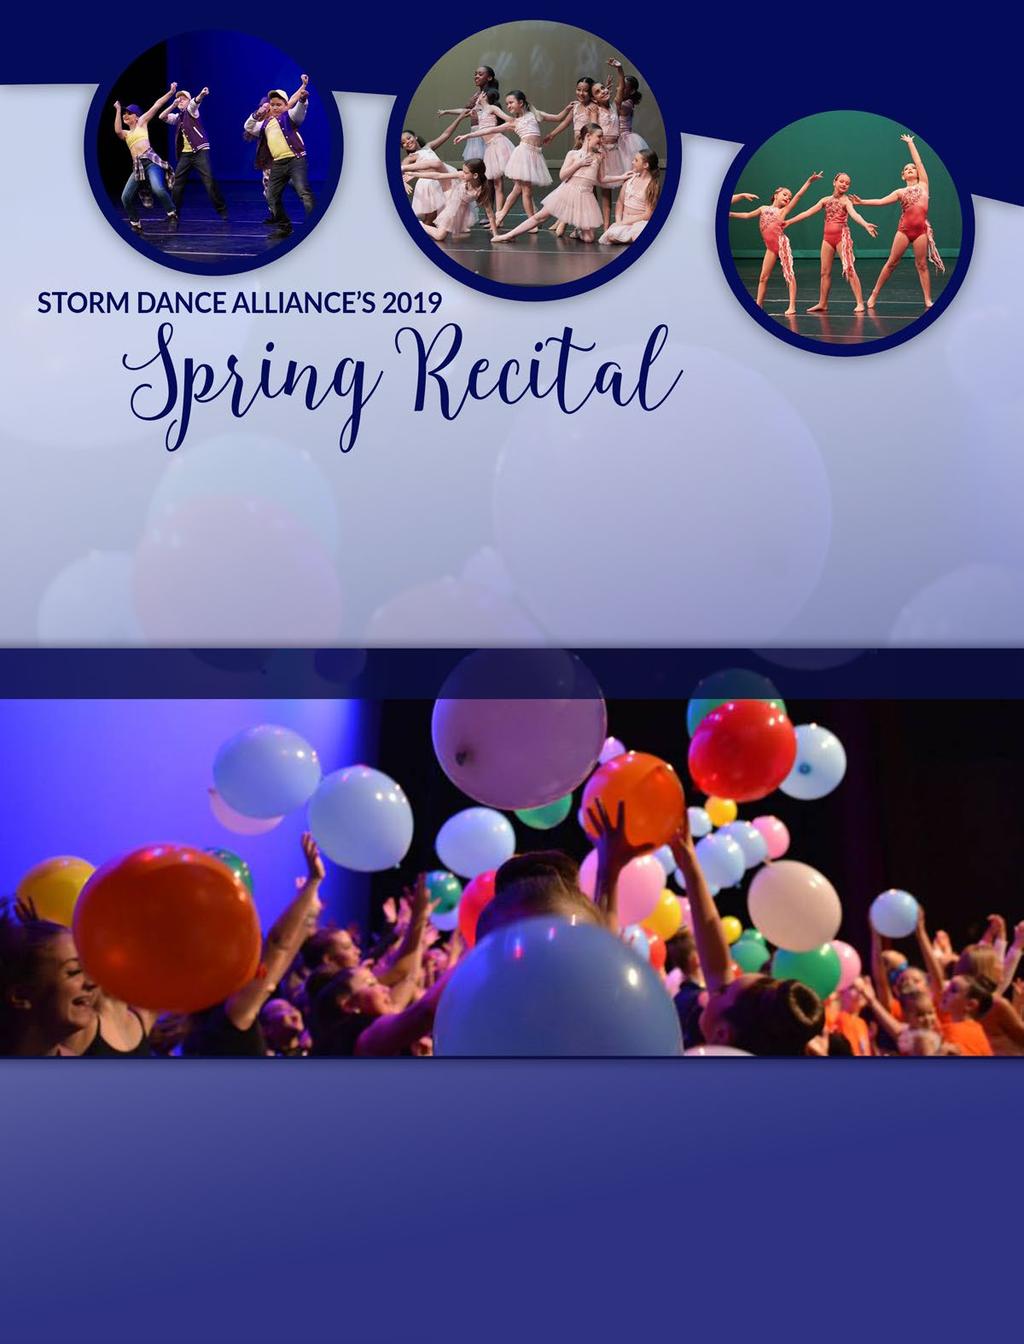 Show #1: Friday, May 3 rd 6:30p Show #2: Saturday, May 4 th 10:30a Show #3: Sunday, May 5 th 1:00p As the Spring Session is a Recital Session, registration for the Spring Session must be done IN THE